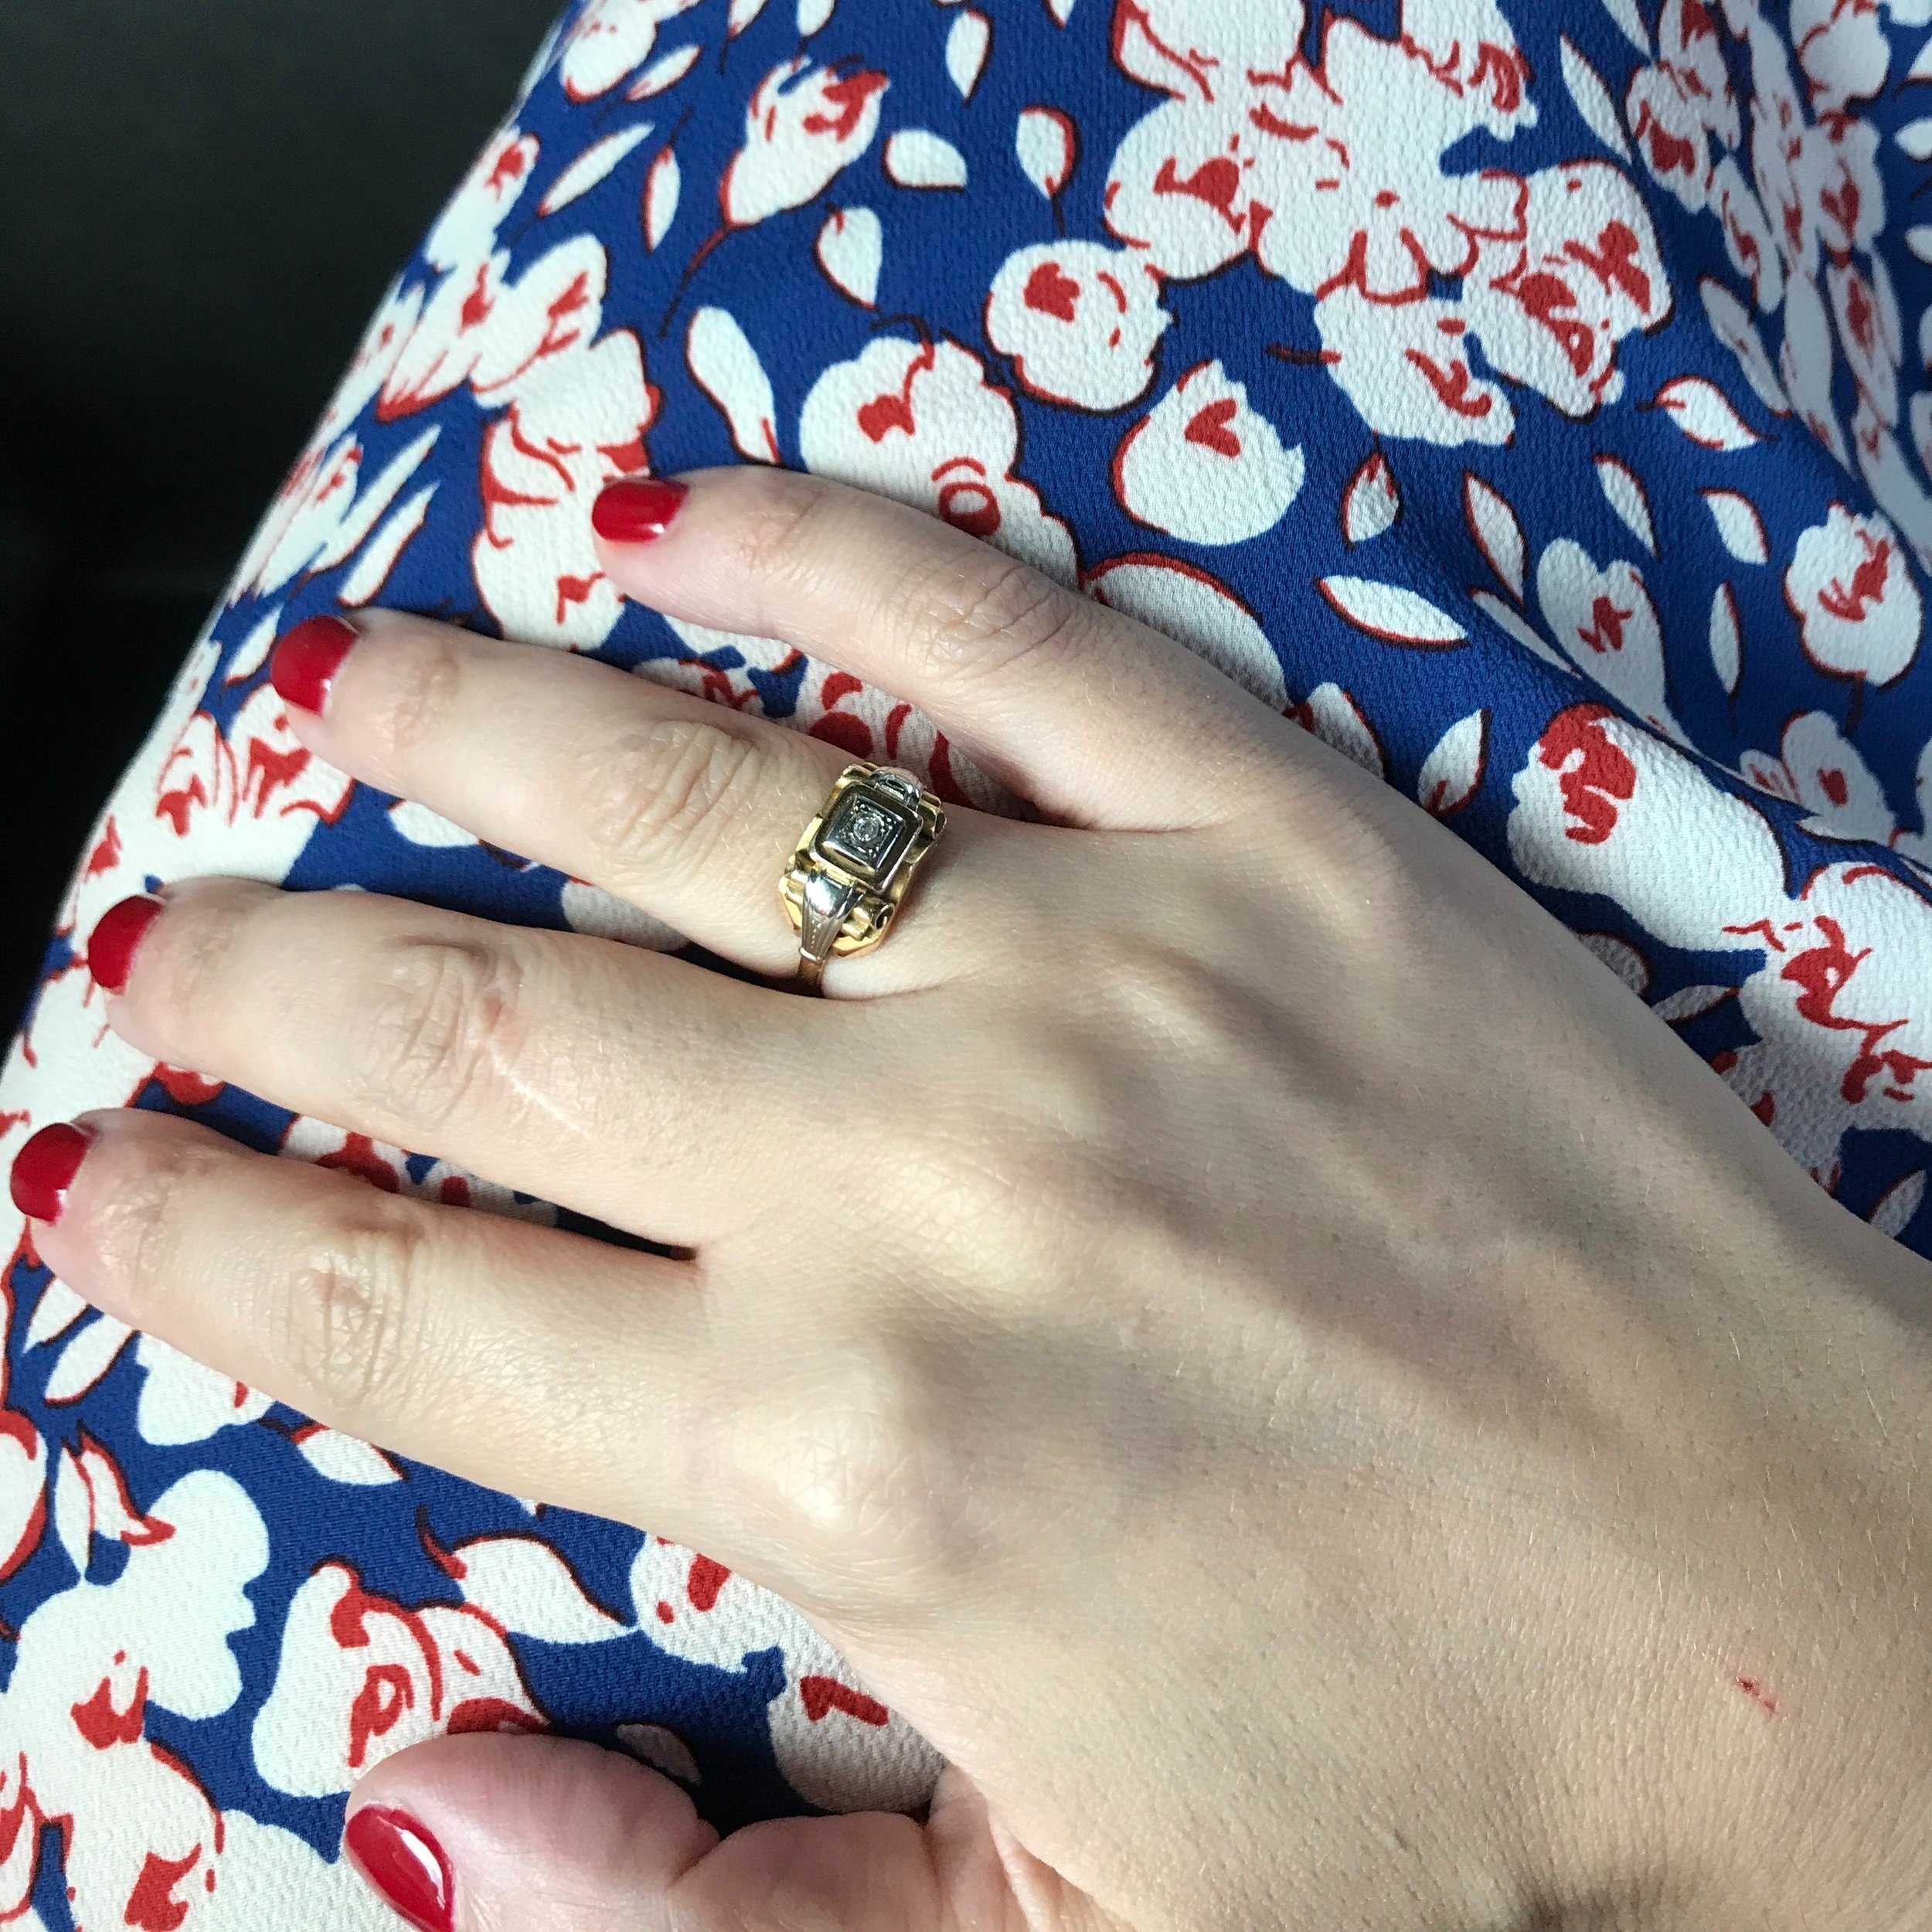 Jewelry that makes Sonia feel strong: her grandmother's engagement ring